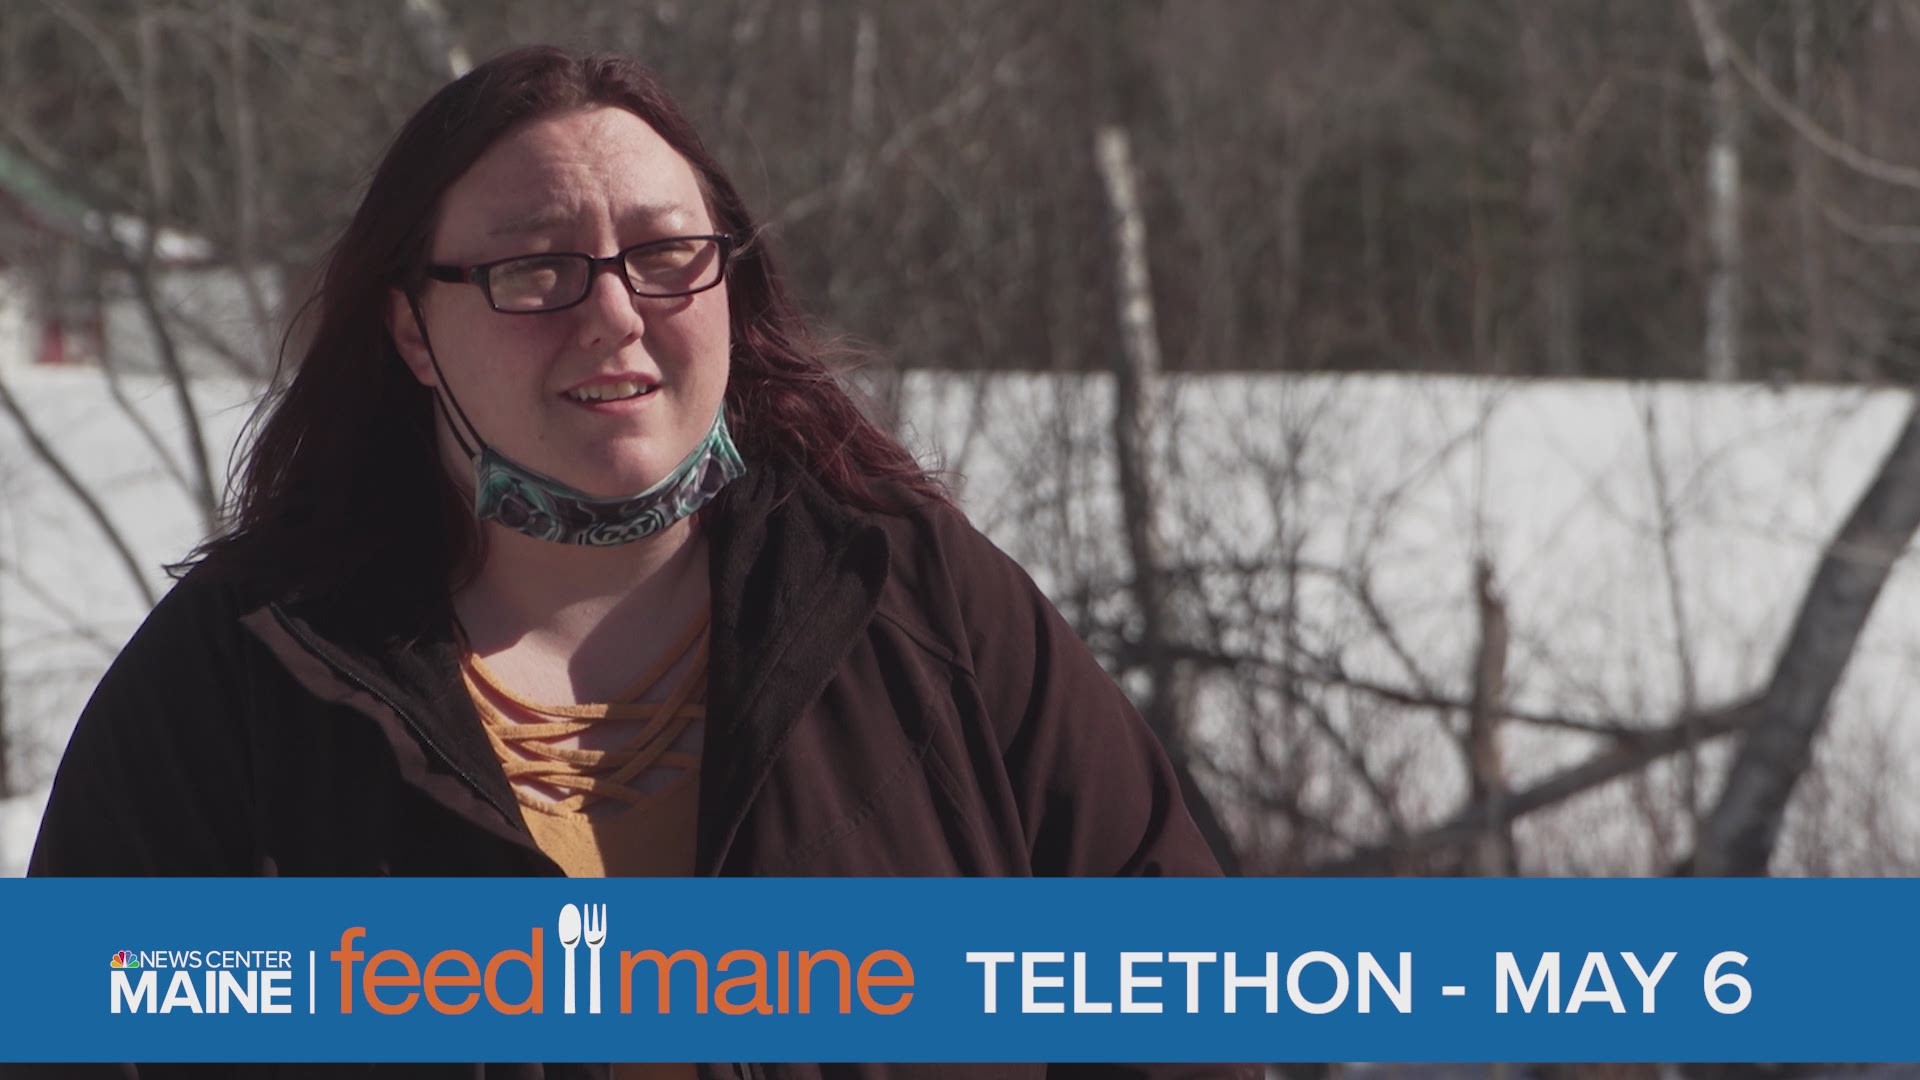 Please donate on May 6 to NEWS CENTER Maine's Feed Maine Telethon. All donations will go to Good Shepherd Food Bank to help Mainers who are food insecure.